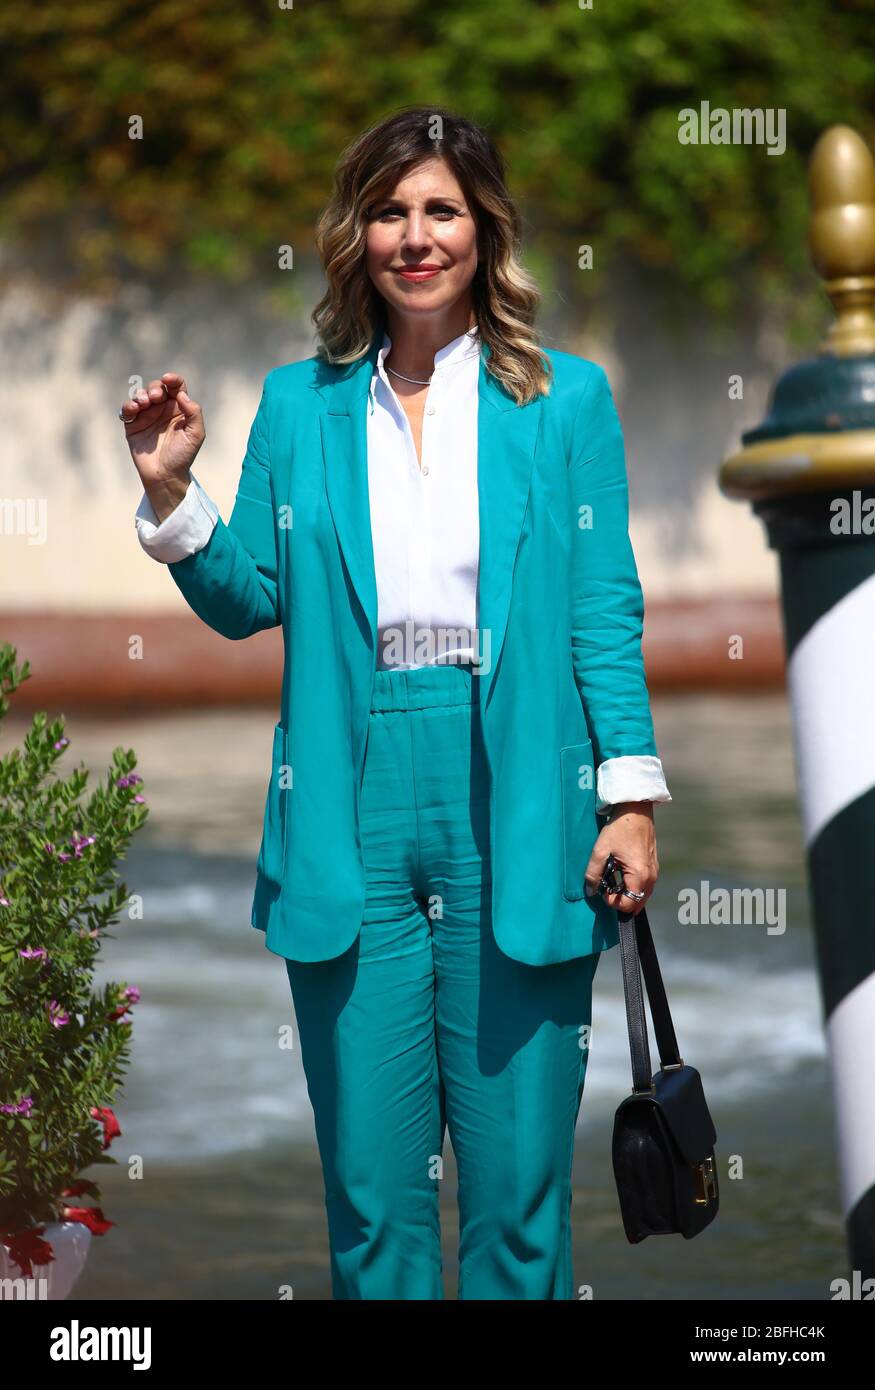 VENICE, ITALY - SEPTEMBER 01: Michela Andreozzi is seen arriving at the 76th Venice Film Festival on September 01, 2019 in Venice, Italy Stock Photo